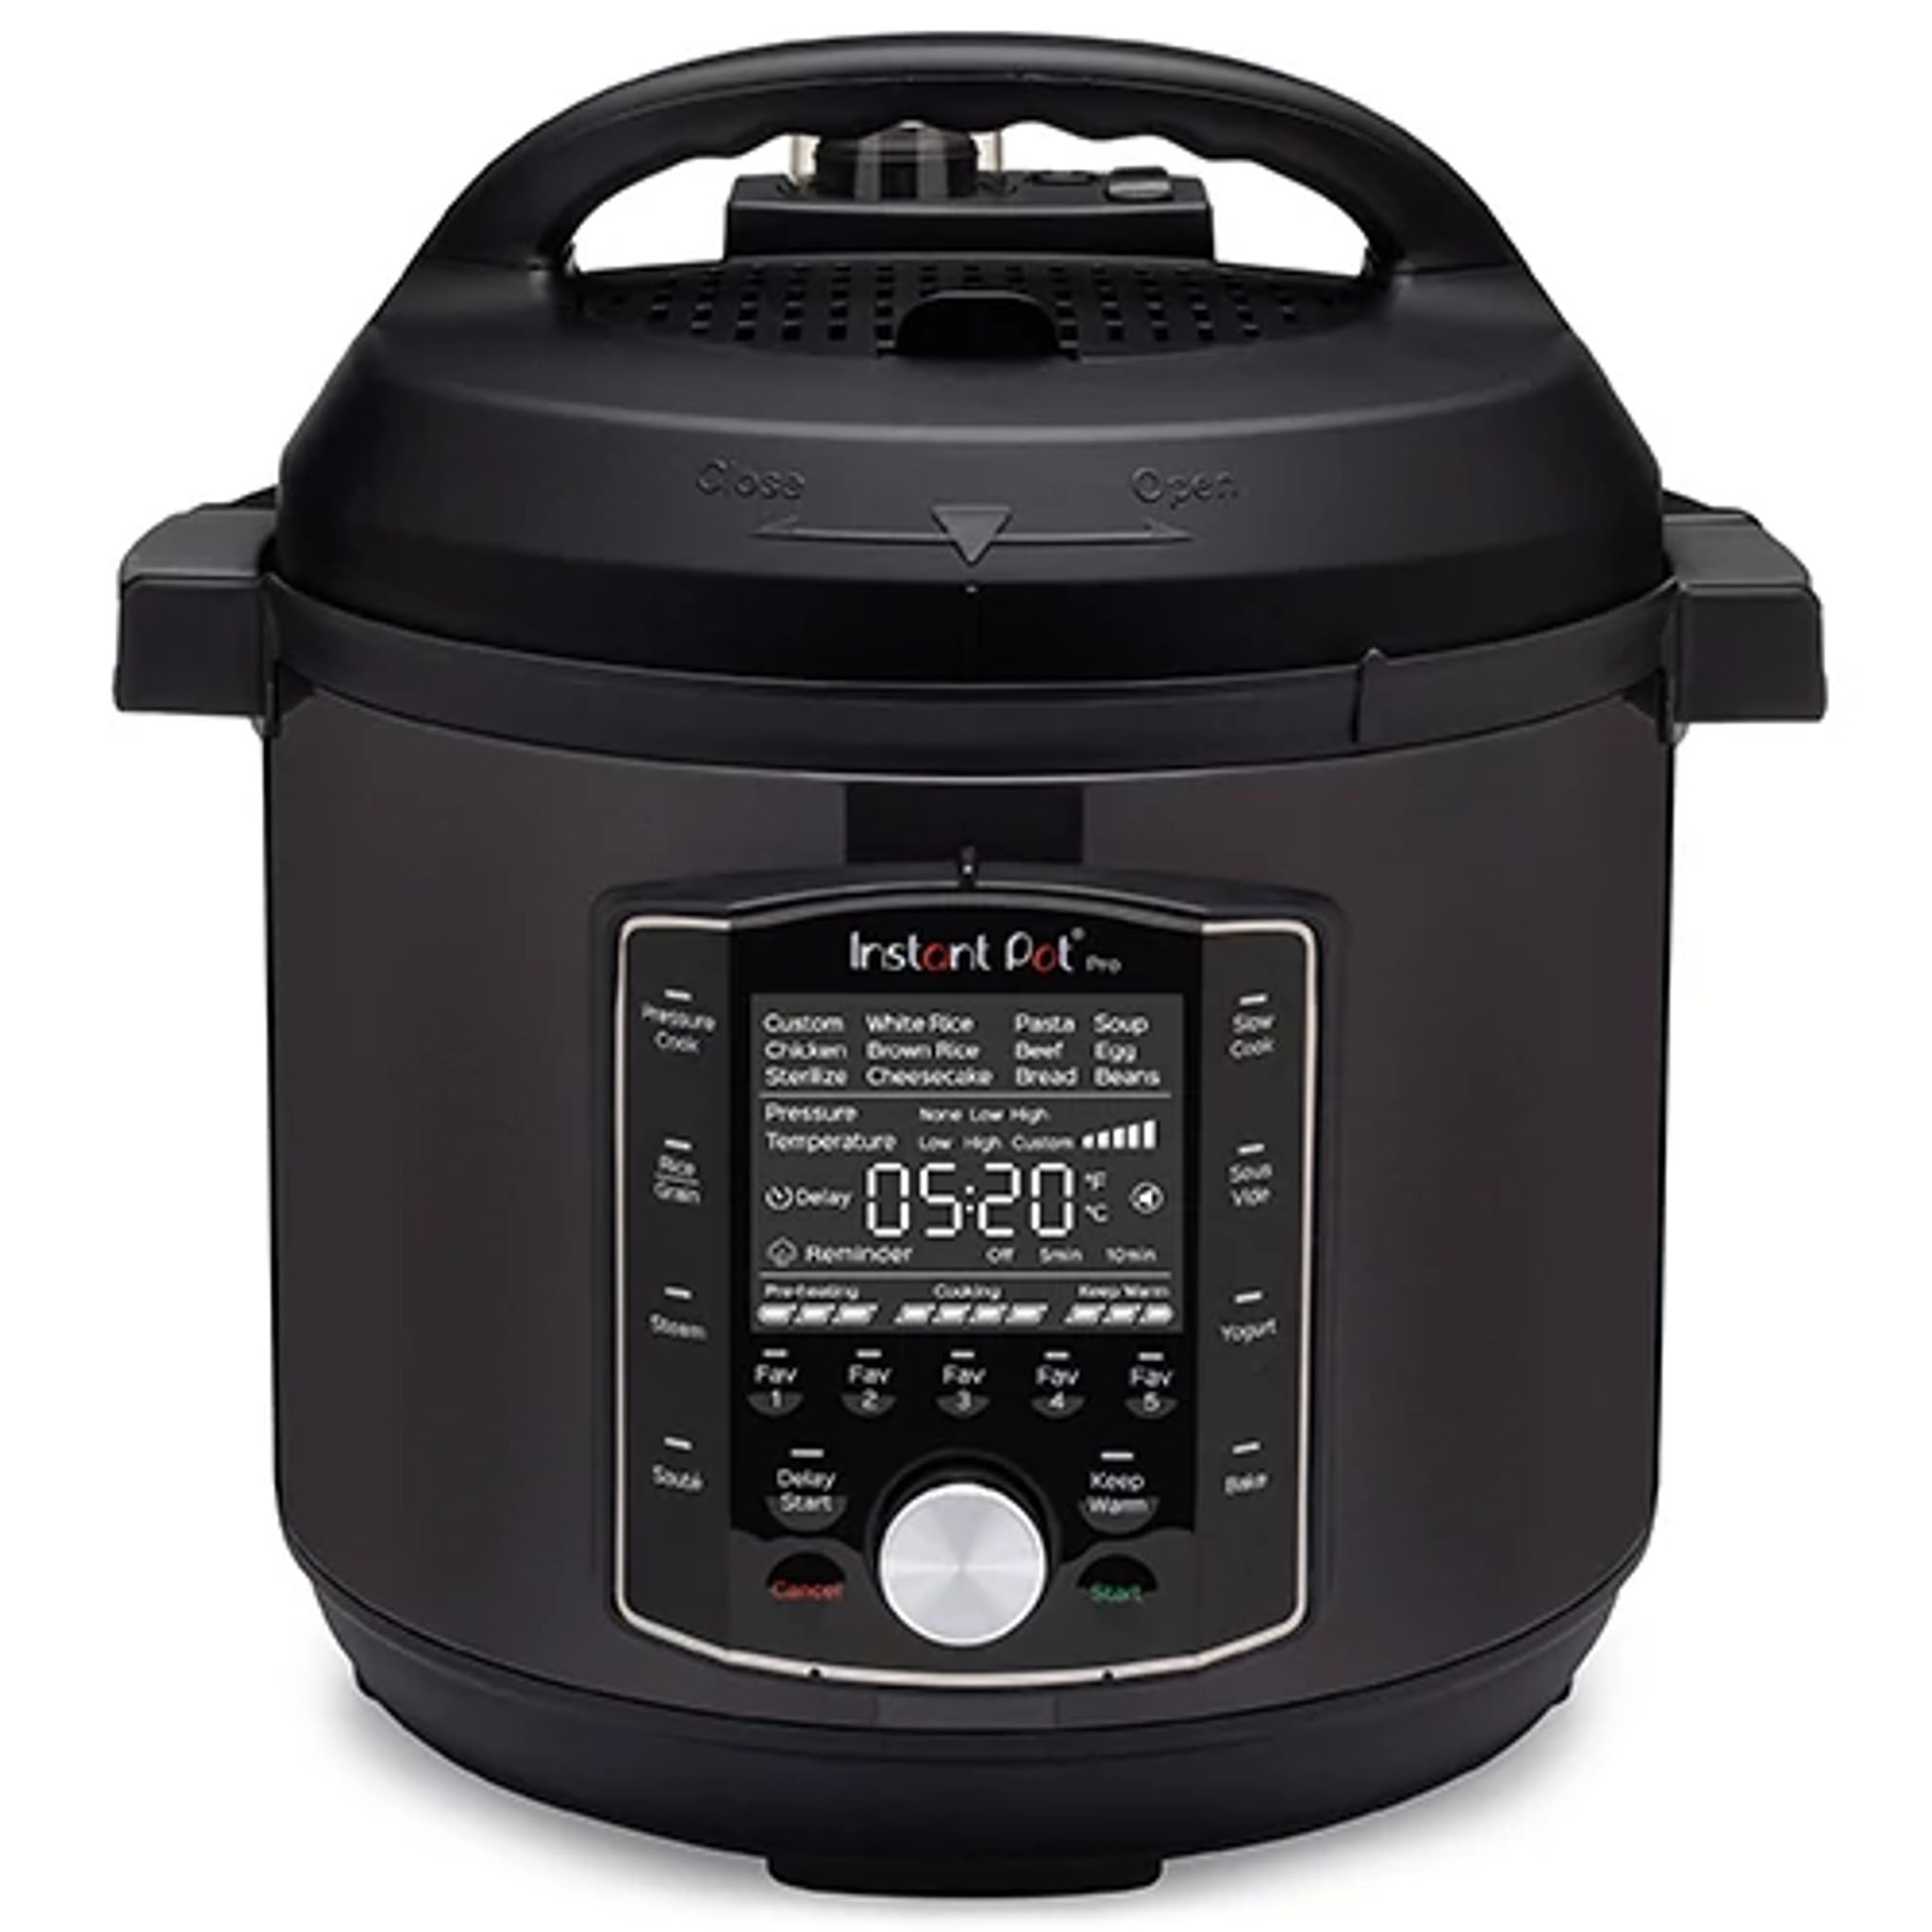 Instant Pot DUO80 8-Quart 7-in-1 Multi-Use Programmable Pressure Cooker Slow Co